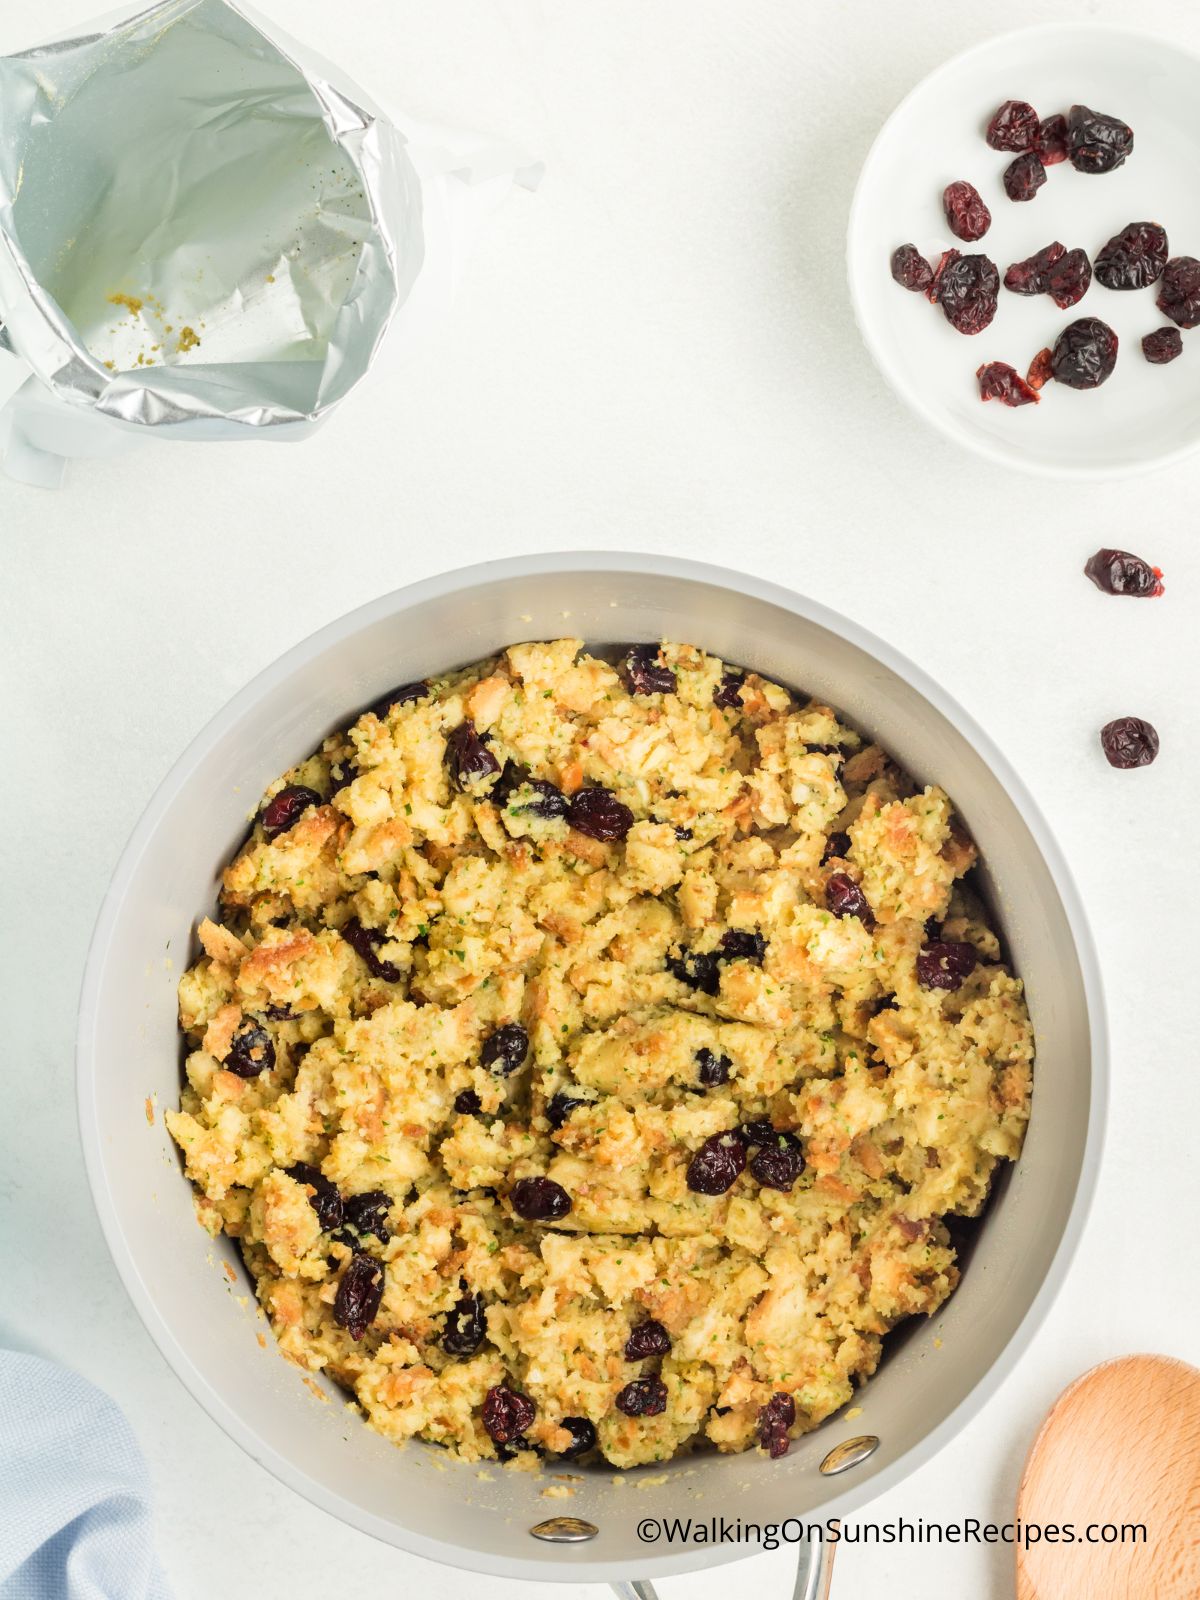 Stove Top Stuffing with craisins.